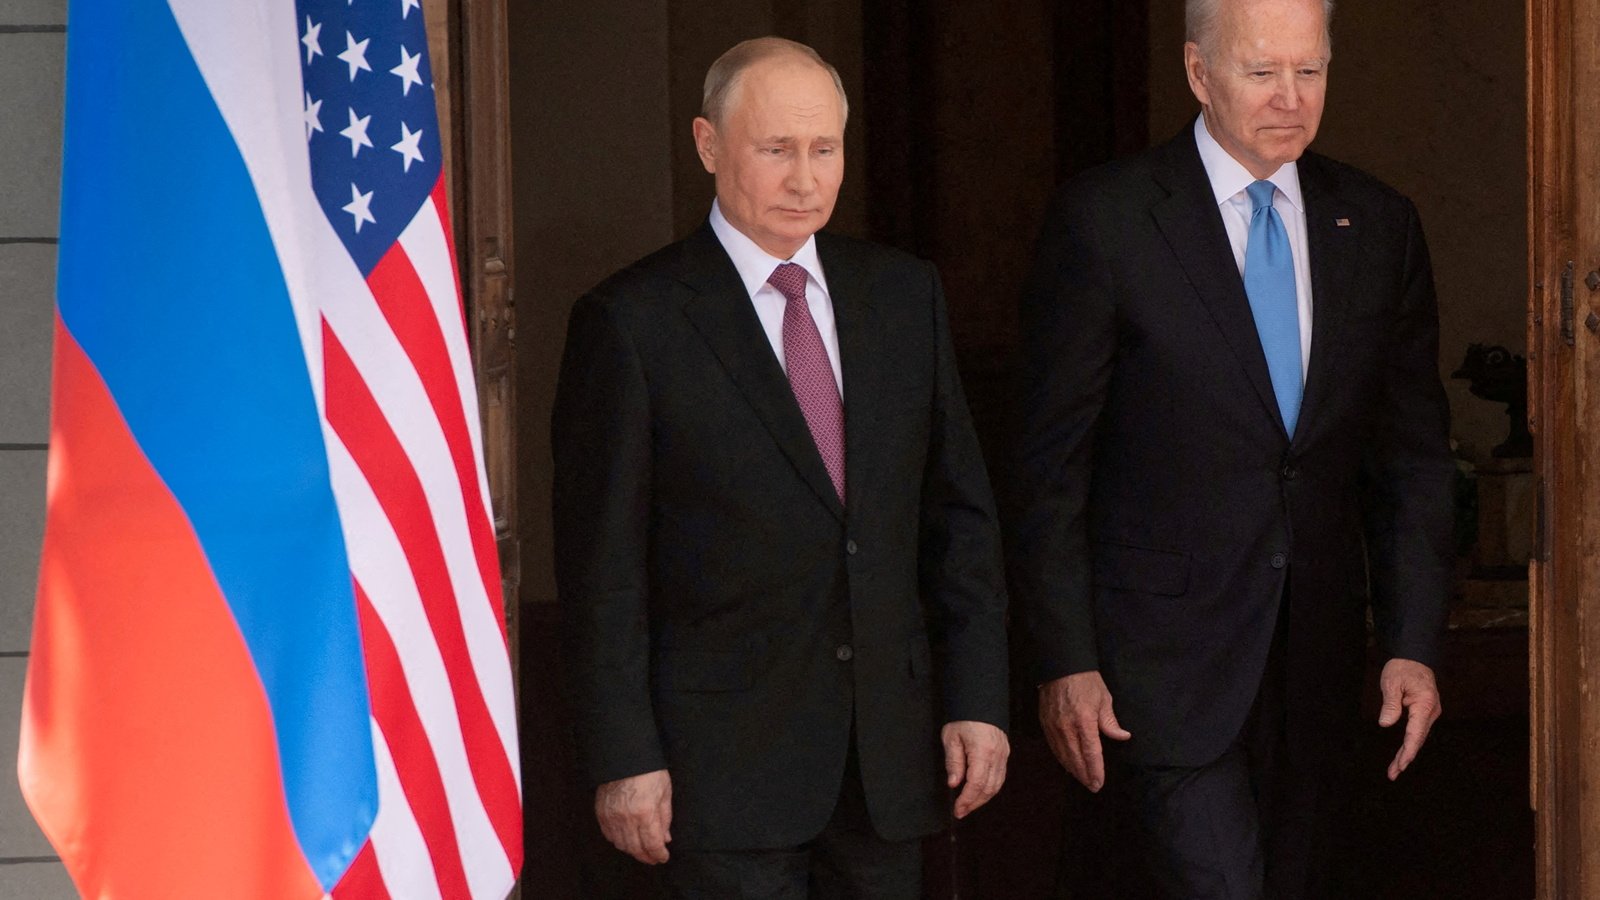 U.S.Russia Relations—What's at Stake? Council on Foreign Relations